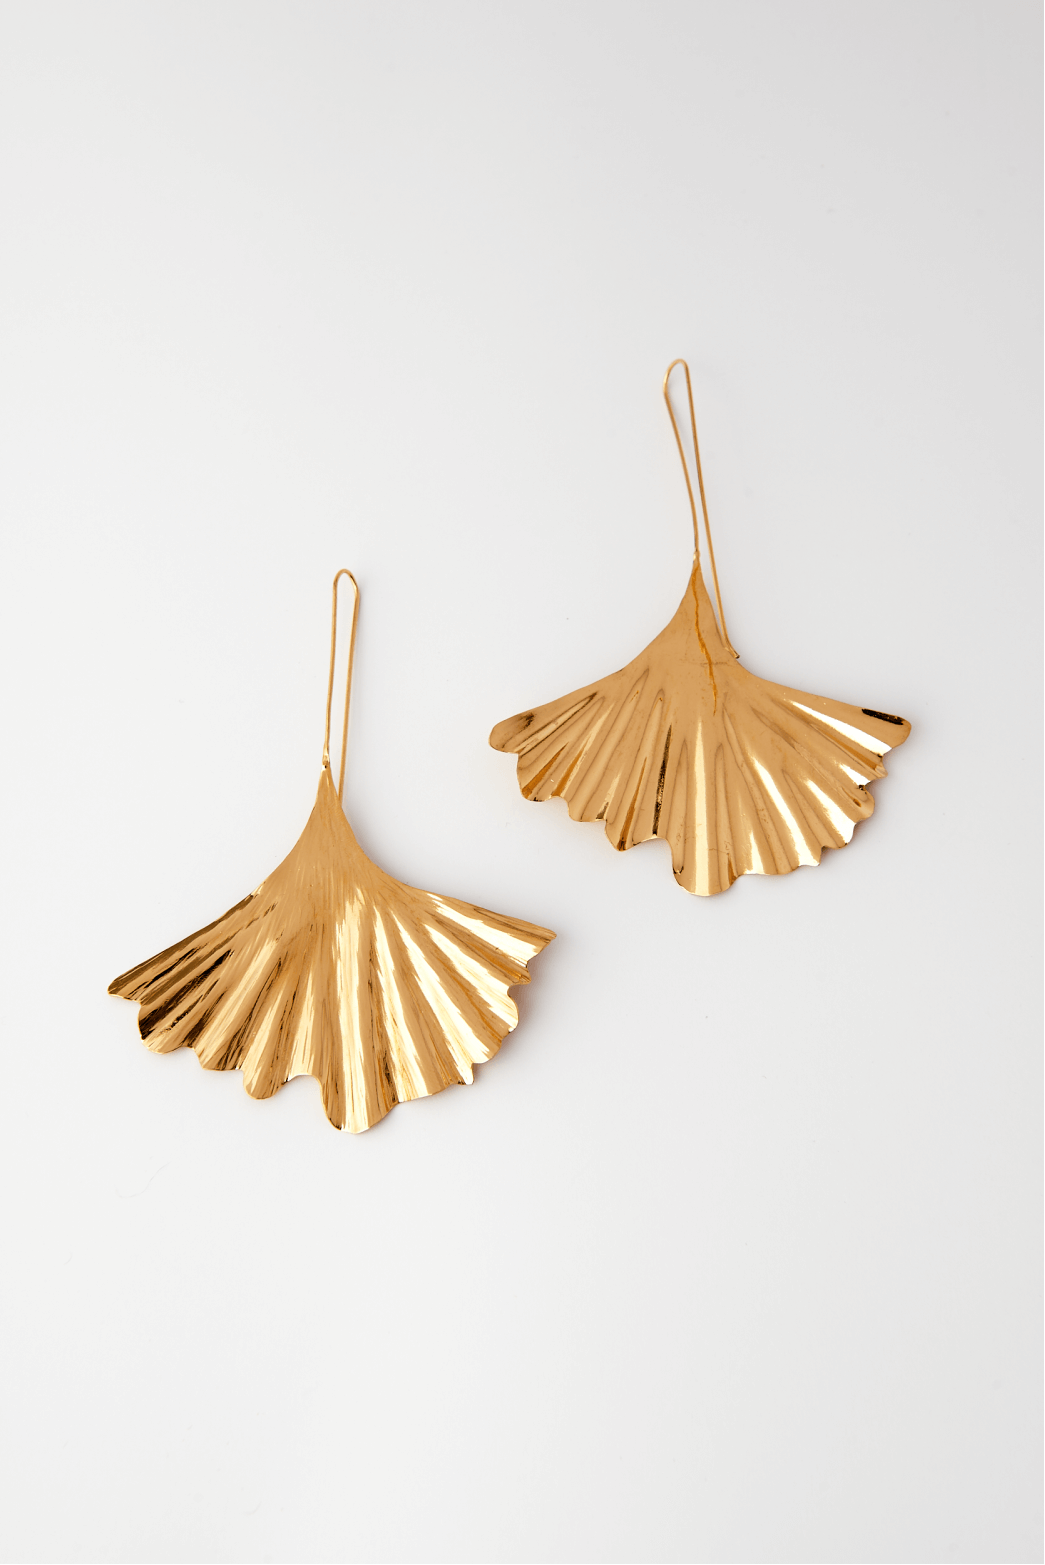 Shop Tawi Stud Earrings by We Are NBO on Arrai. Discover stylish, affordable clothing, jewelry, handbags and unique handmade pieces from top Kenyan & African fashion brands prioritising sustainability and quality craftsmanship.